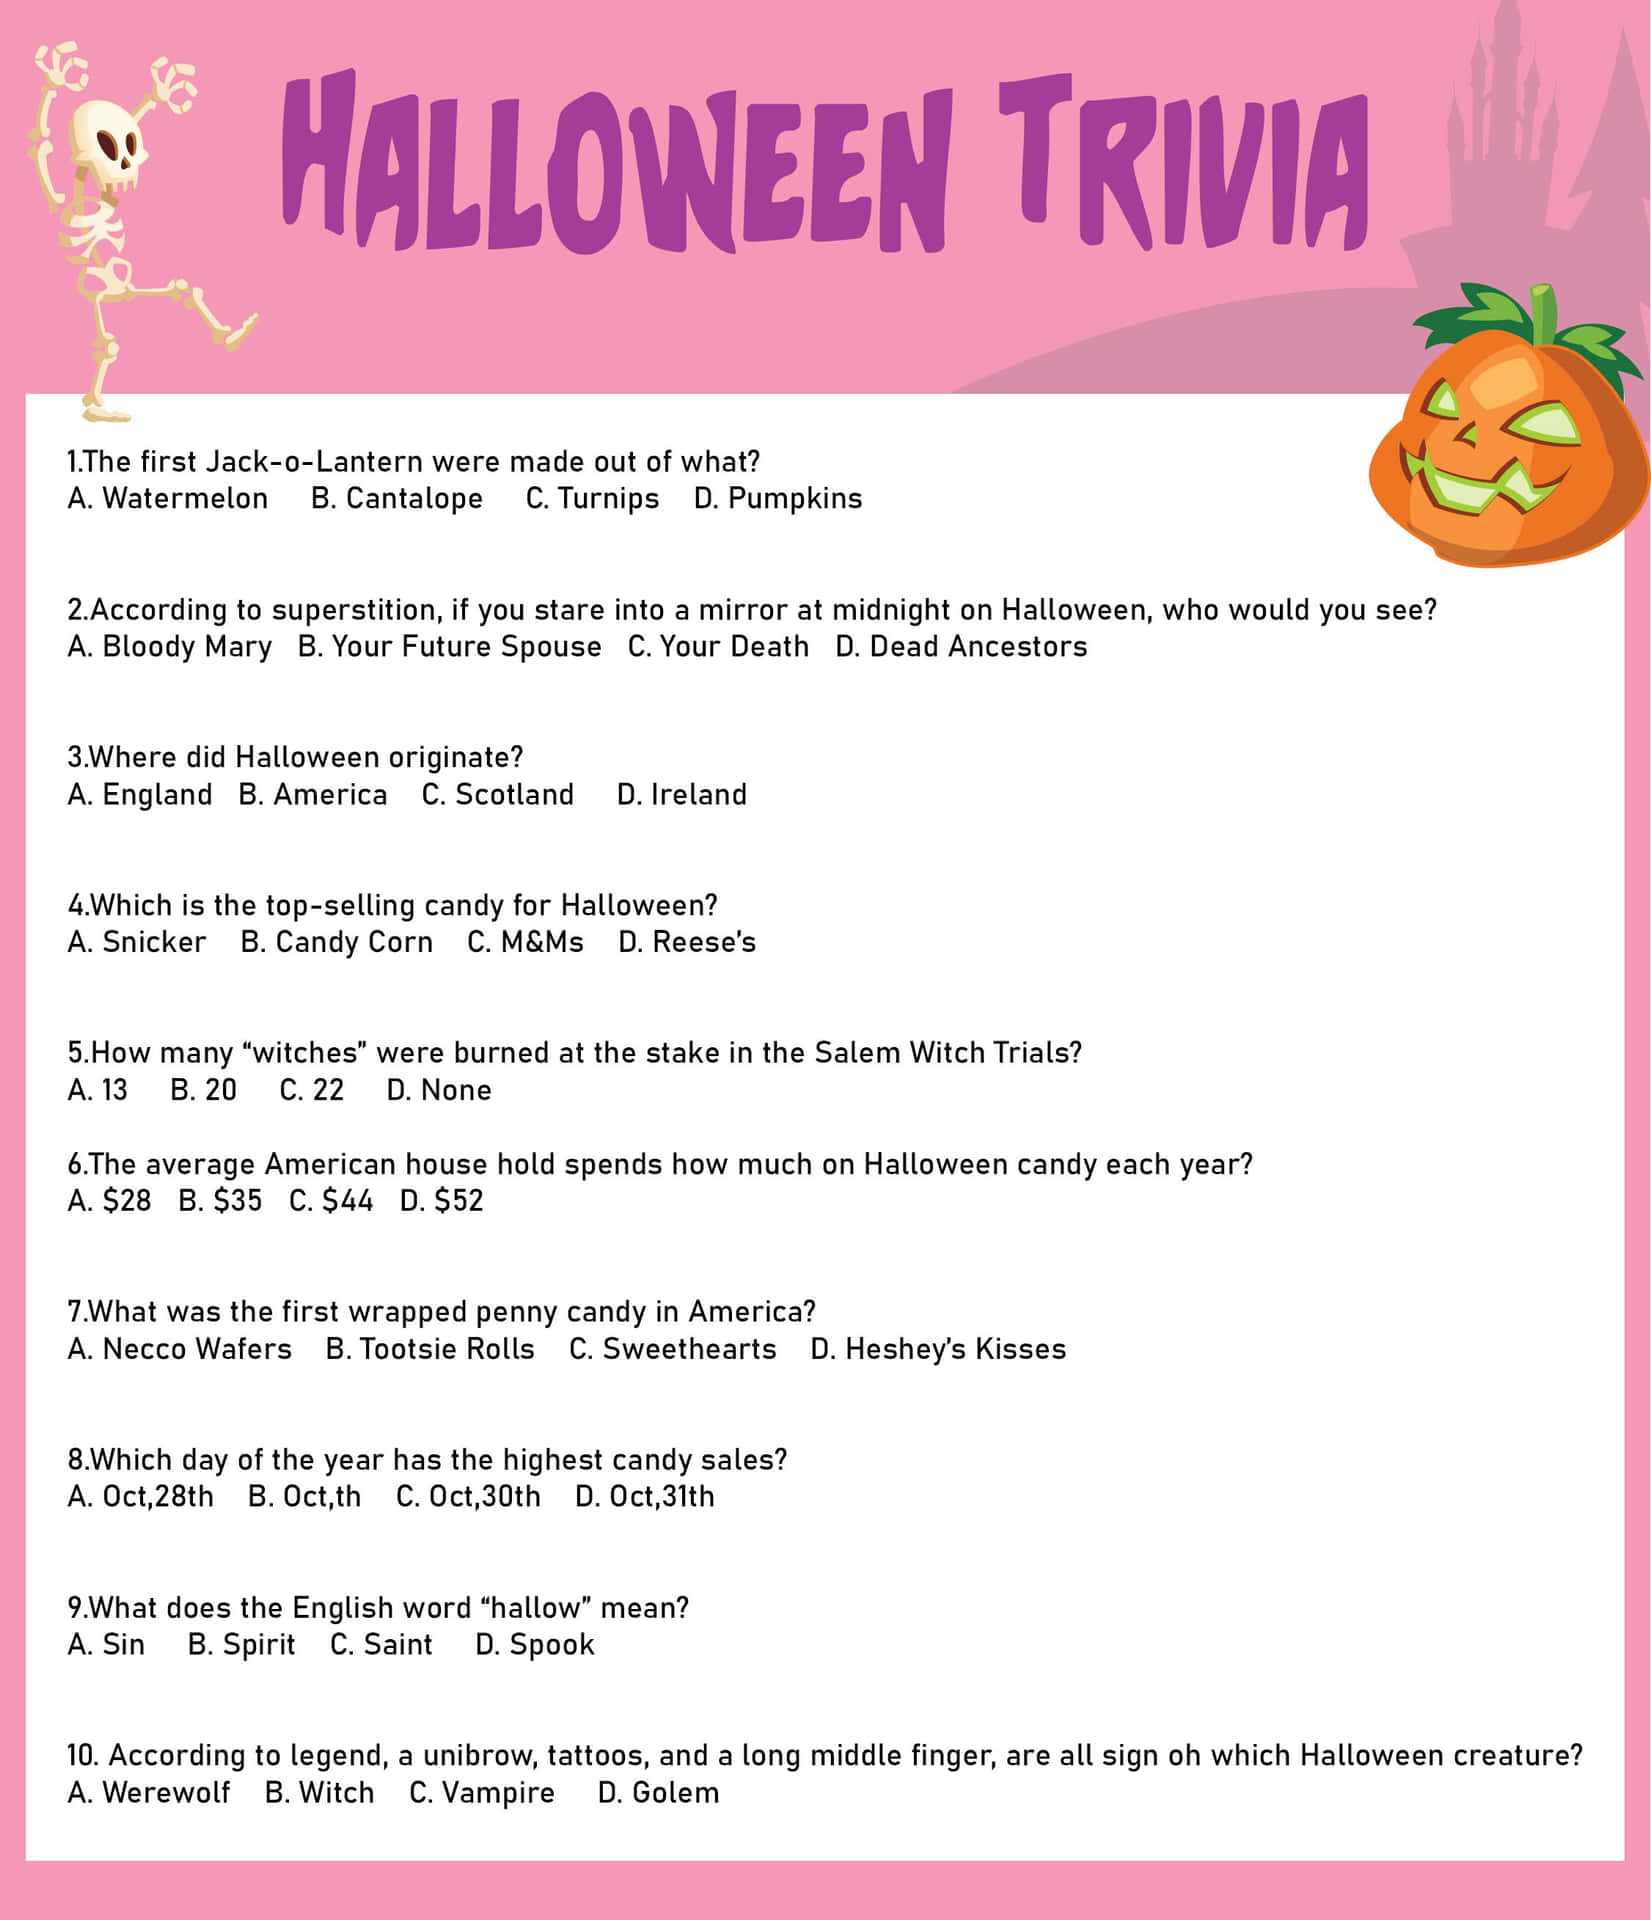 Test your Halloween knowledge with this fun Trivia game Wallpaper